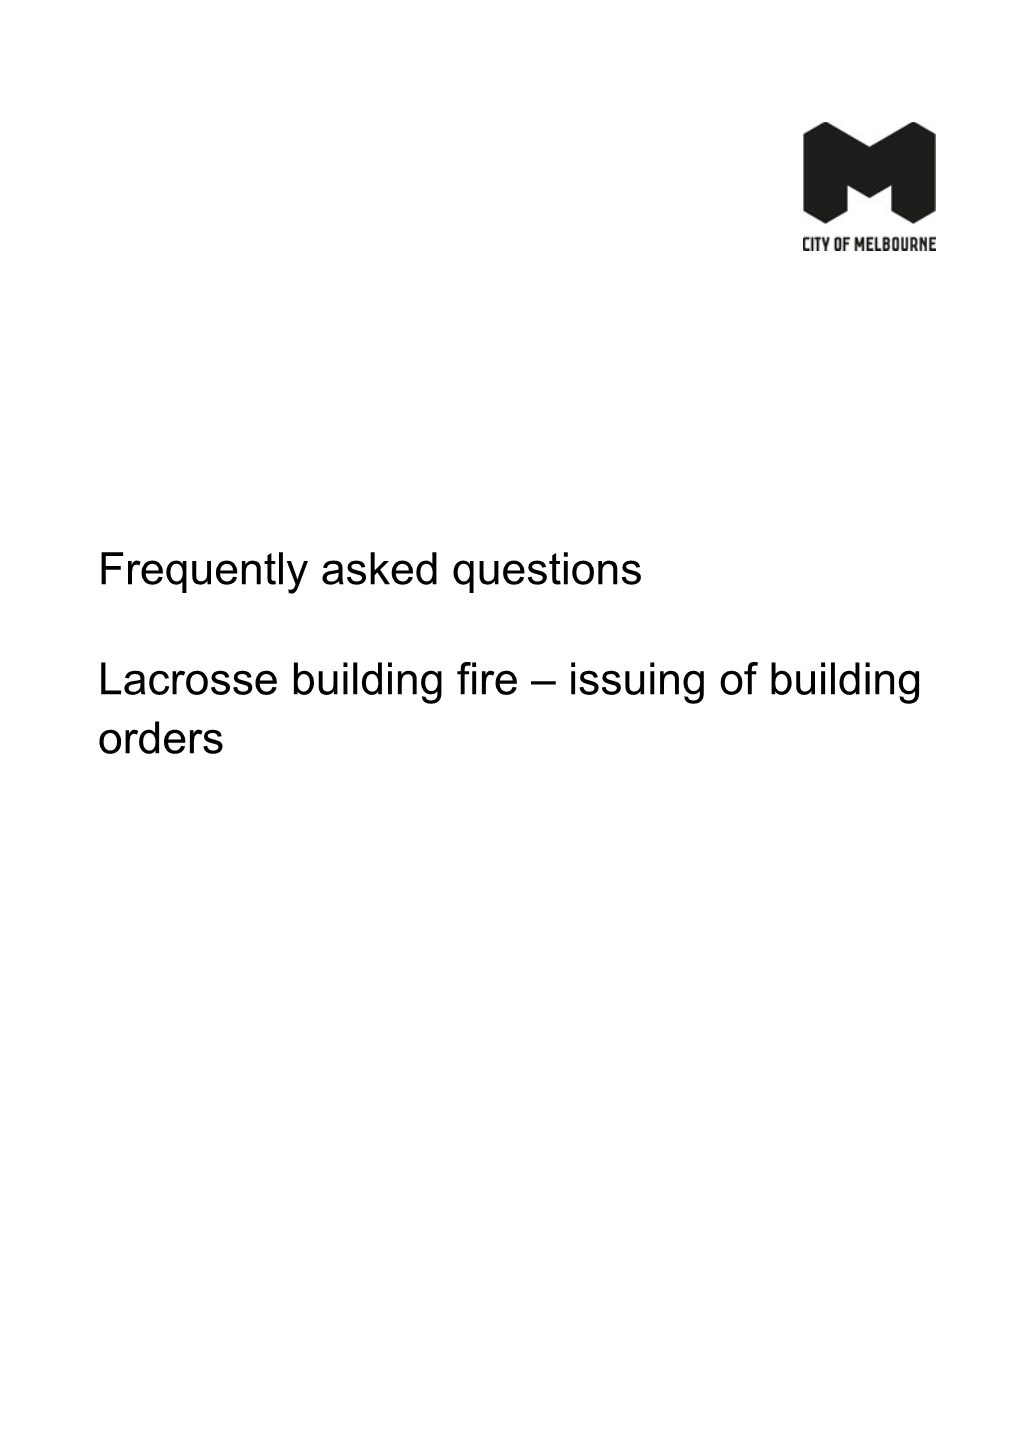 Frequently Asked Questions: Lacrosse Building Fire Issuing of Building Orders